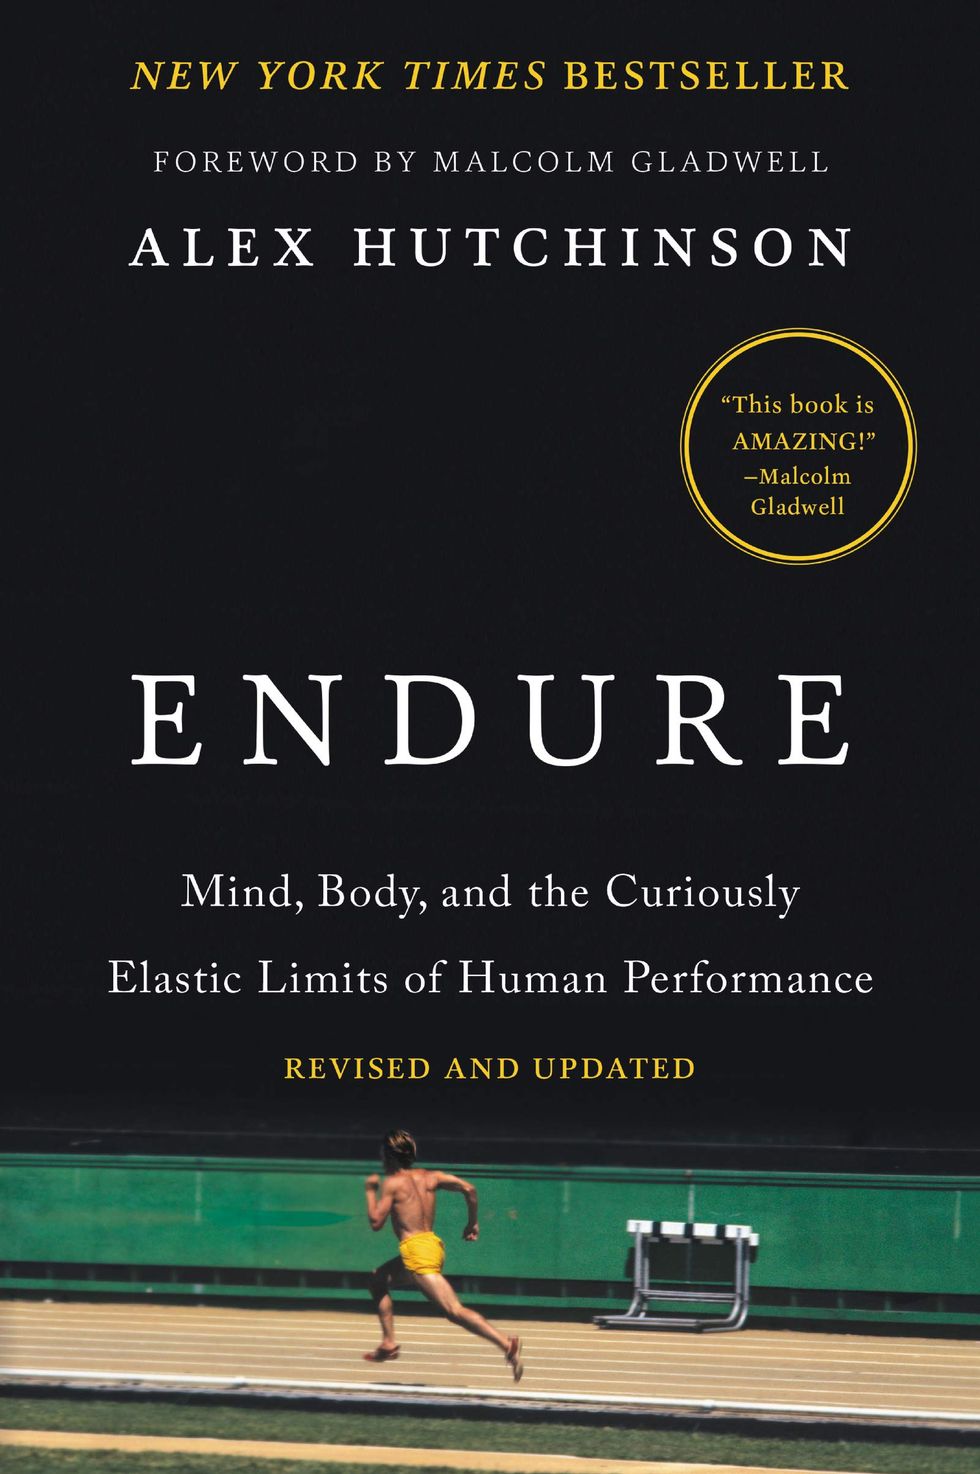 'Endure: Mind, Body, and the Curiously Elastic Limits of Human Performance' by Alex Hutchinson